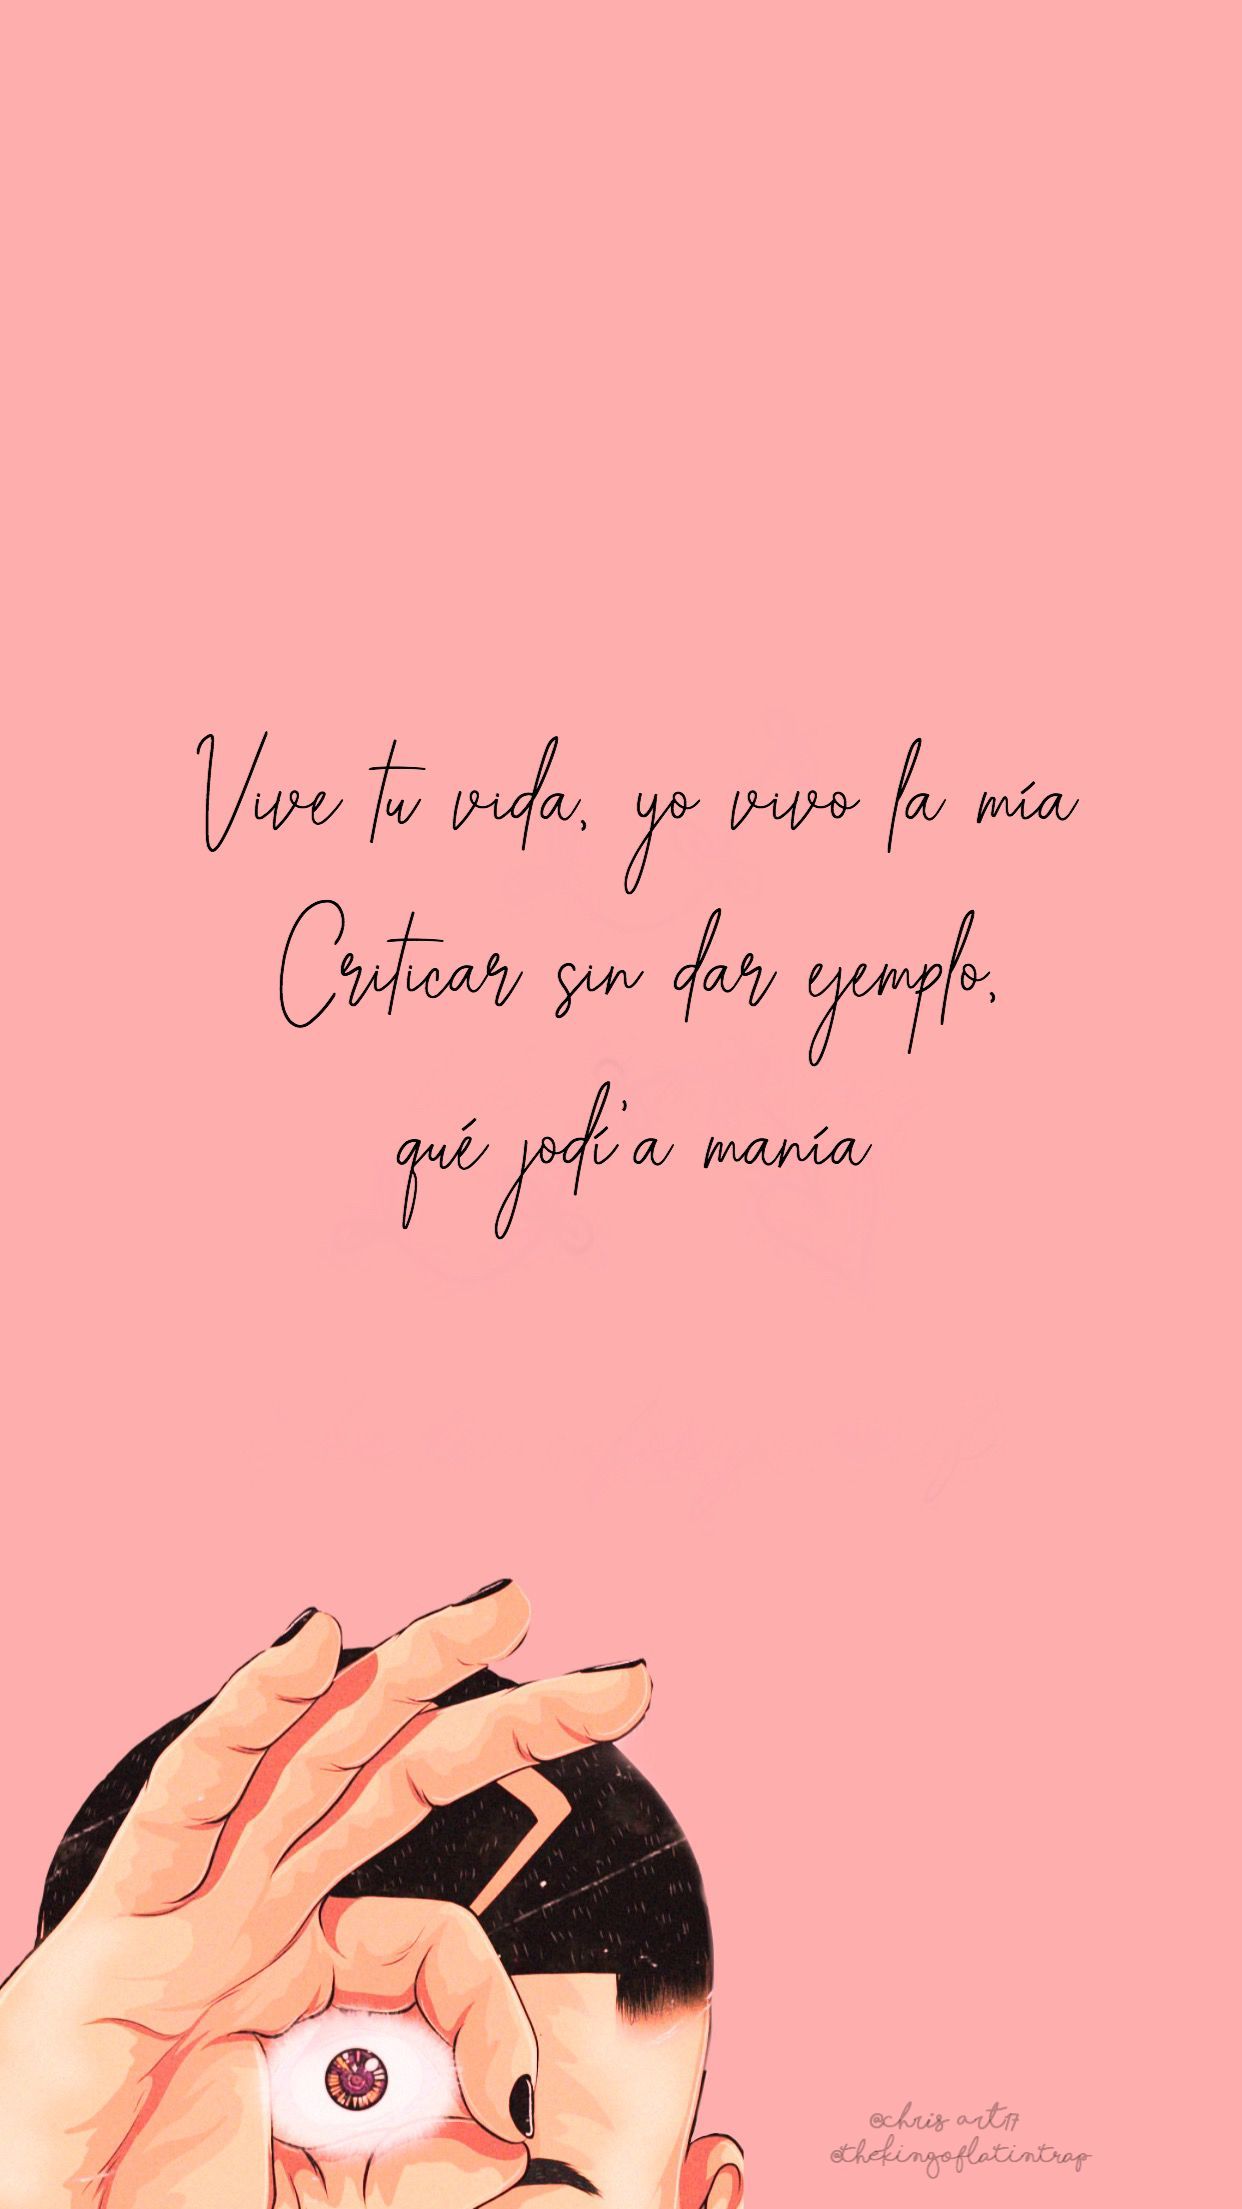 Spanish Quotes Aesthetic Wallpaper Free Spanish Quotes Aesthetic Background